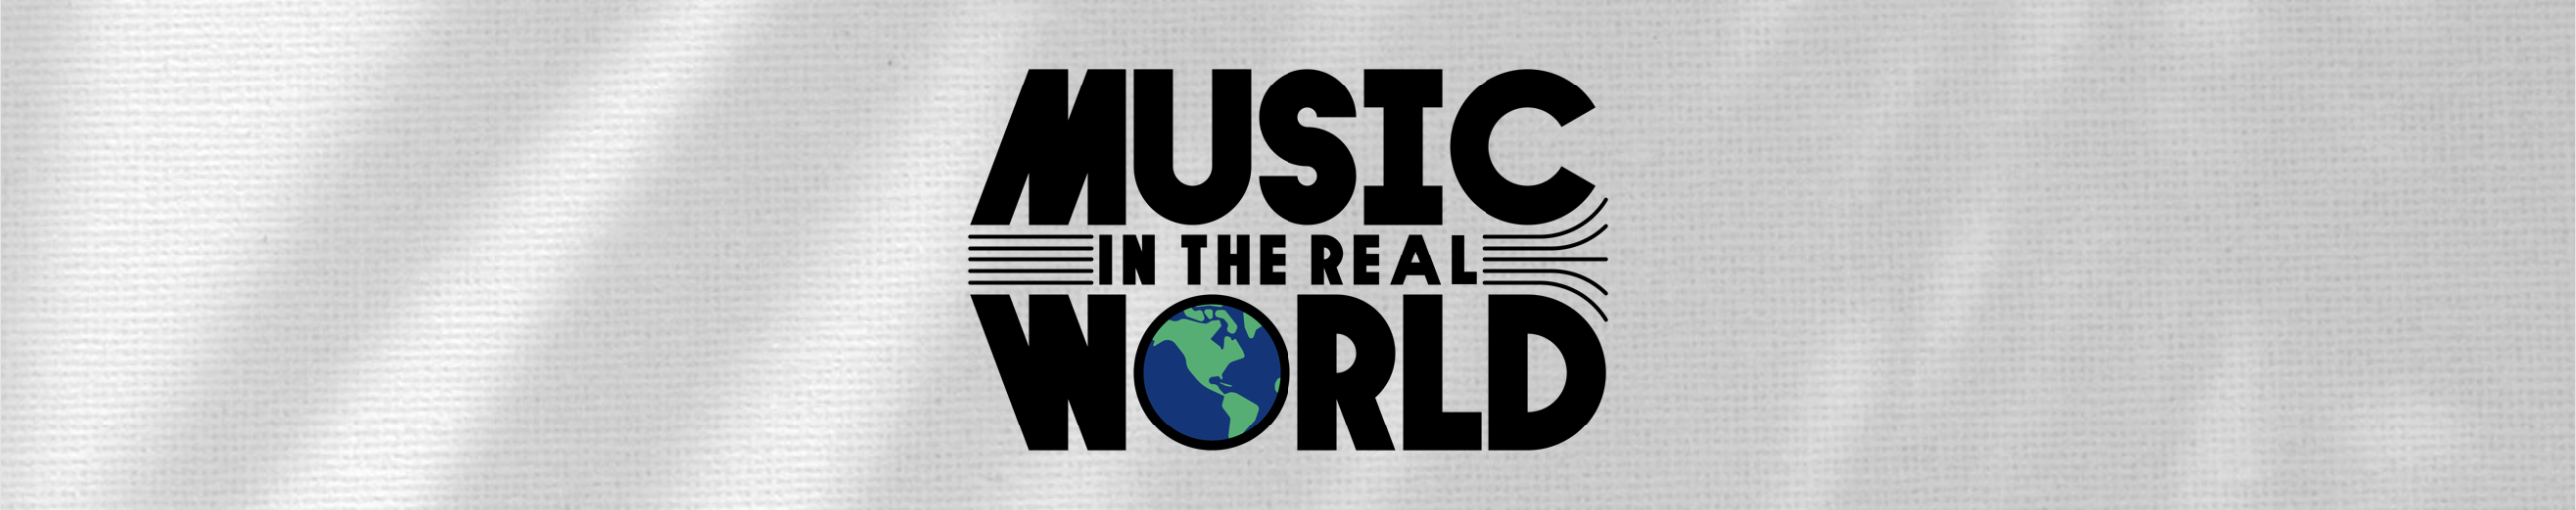 Music In The Real World, logo and banner